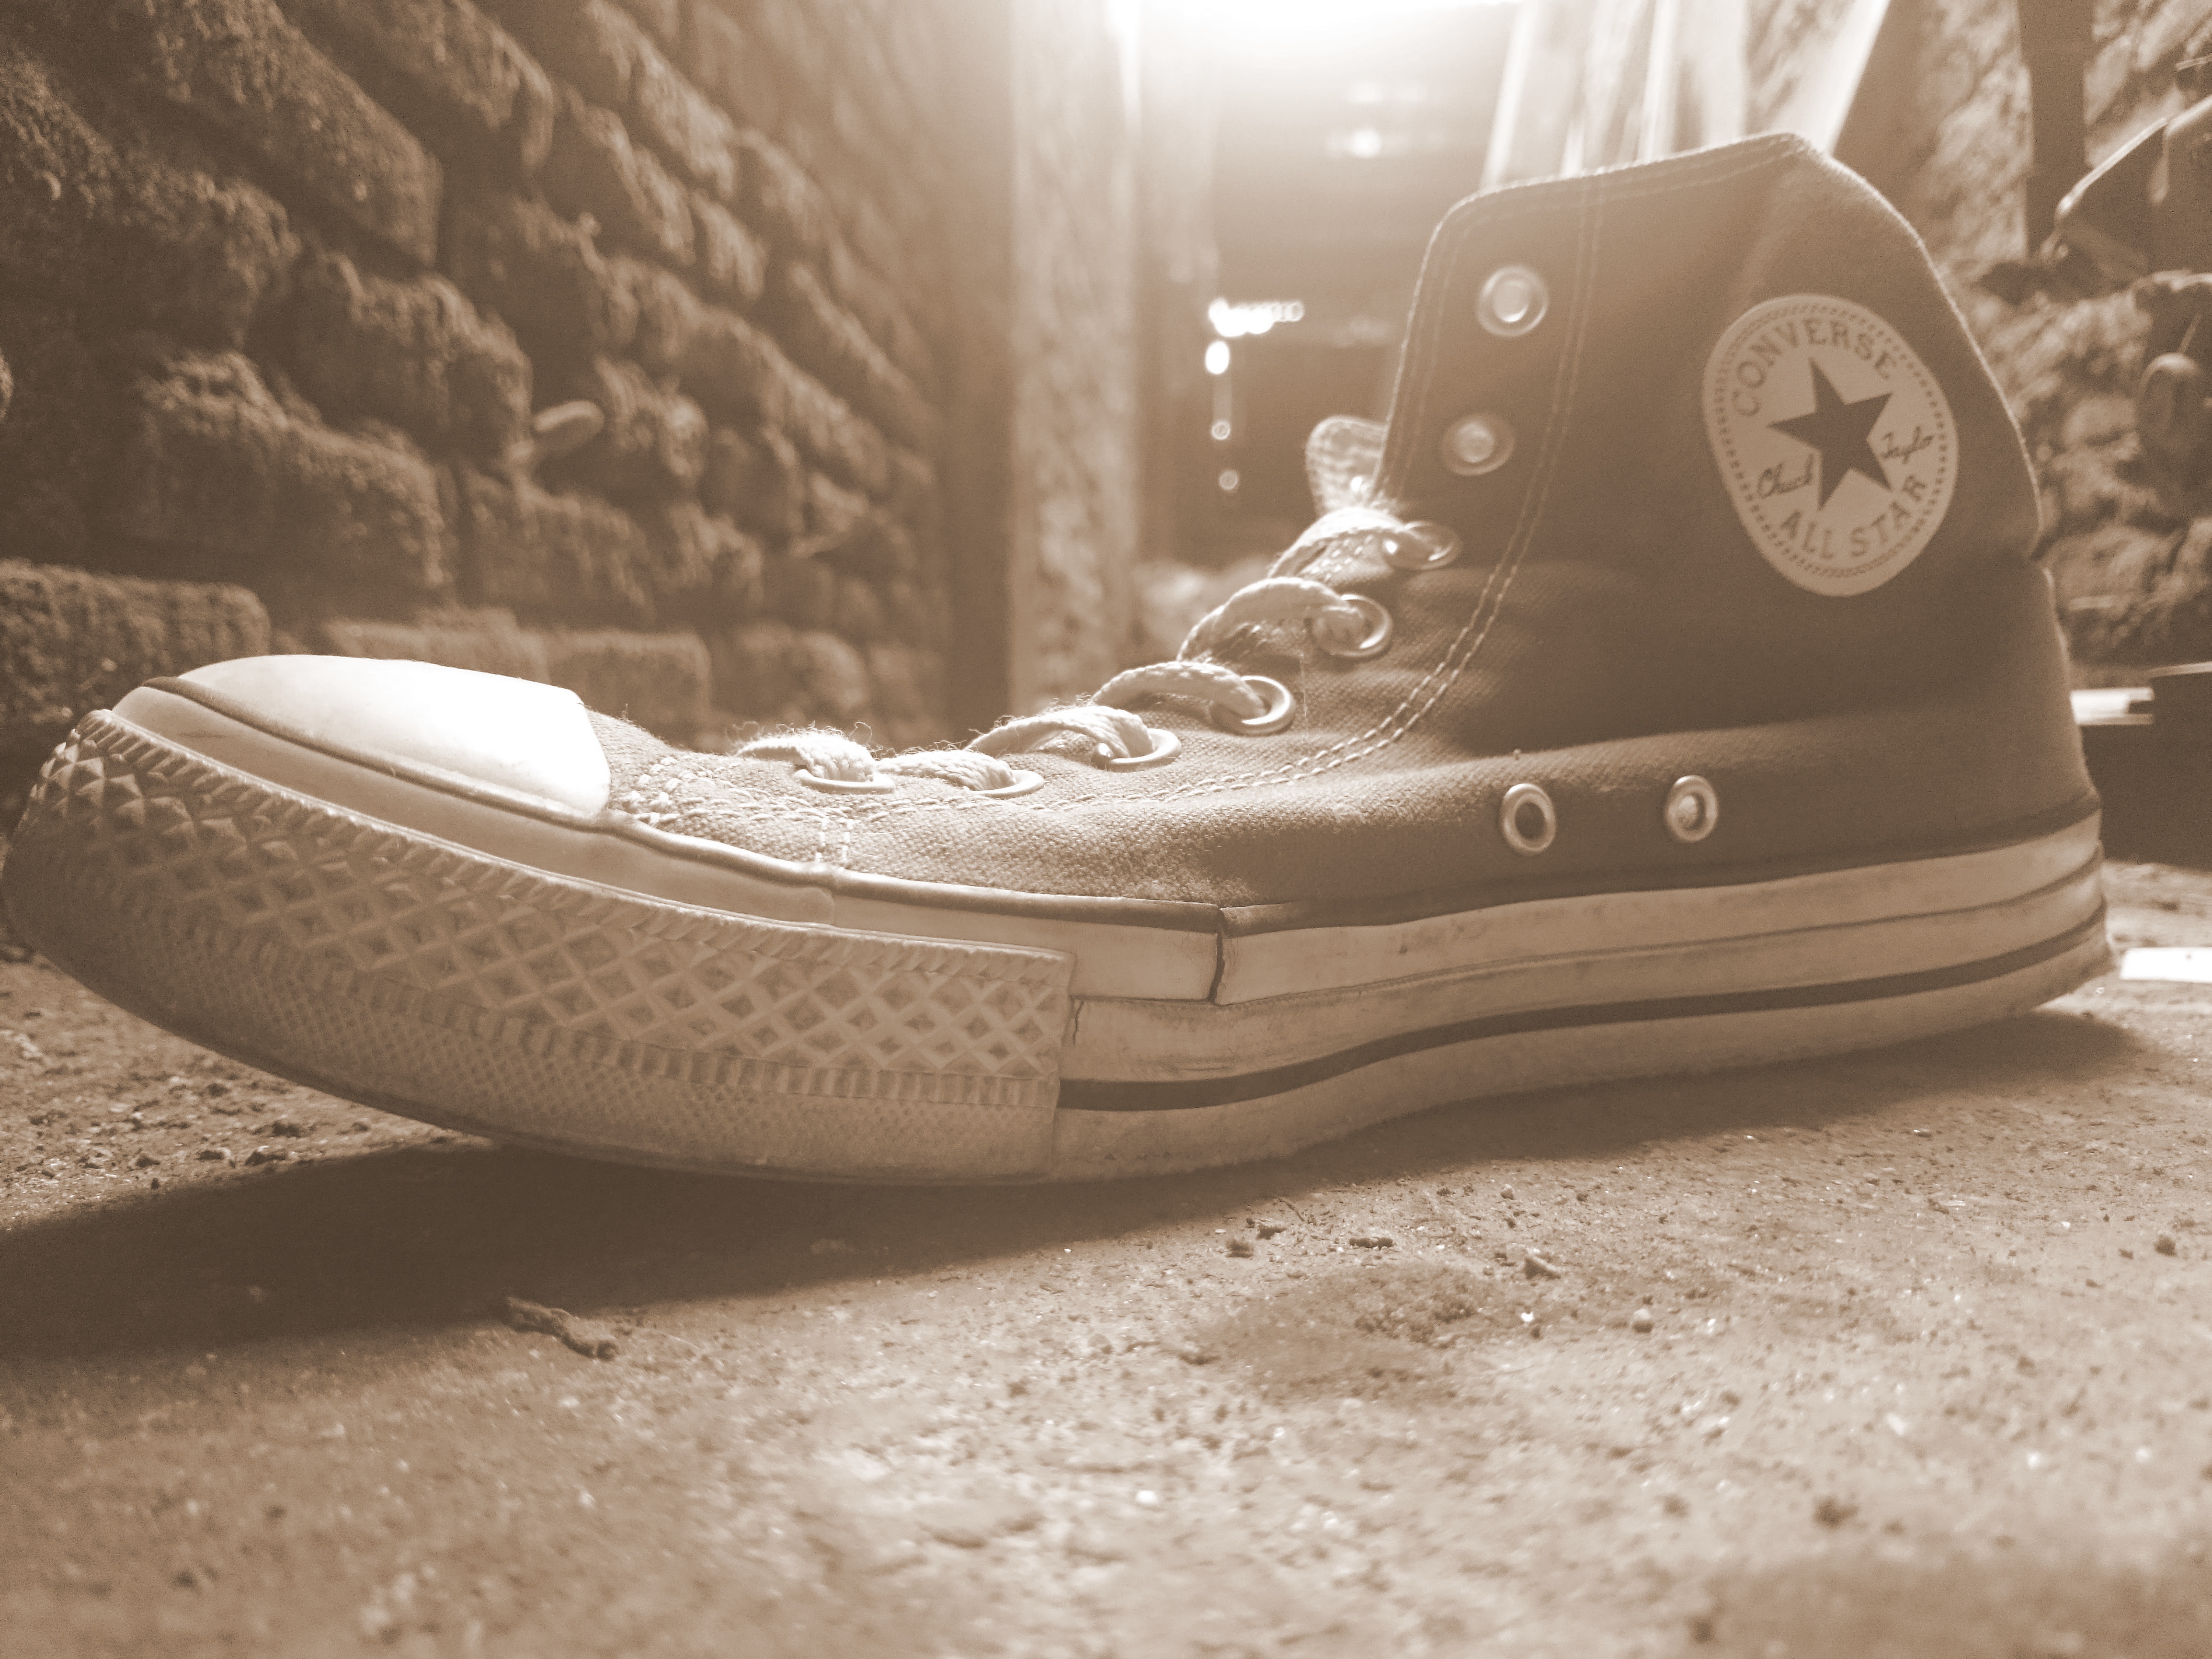 Old Converse Shoe, Brand, Converse, Old, Shoes, HQ Photo